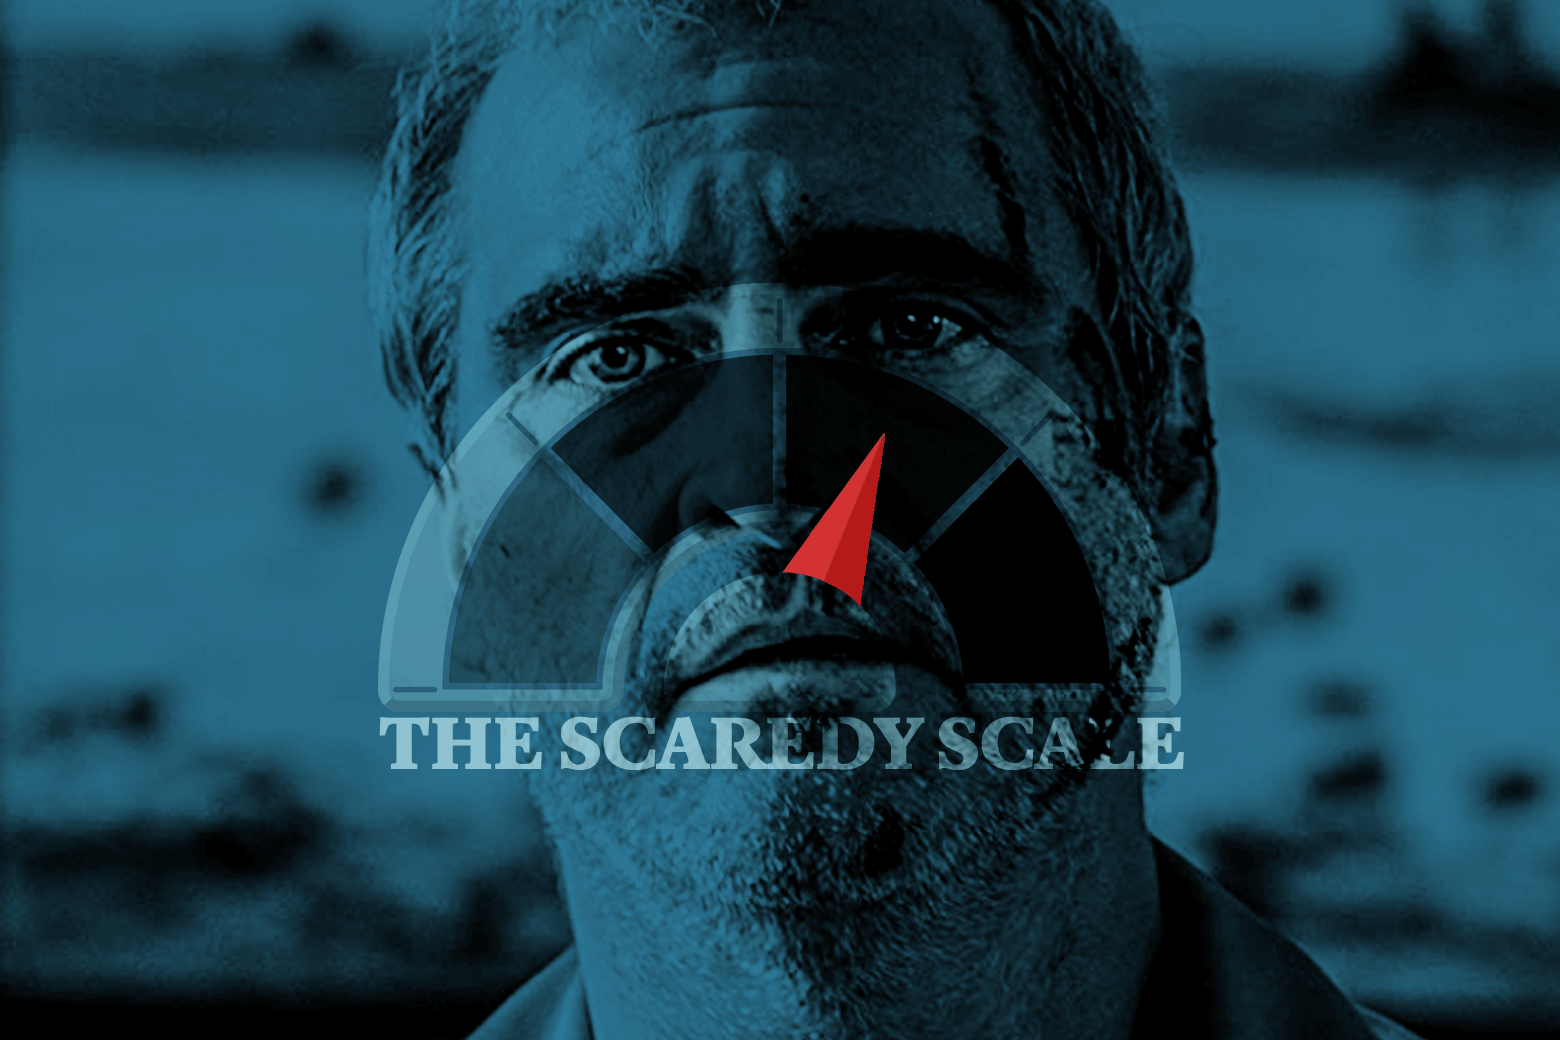 A still of Joaquin Phoenix's pace, looking concerned and a little scraped up, while in front of it is photoshopped a twitching meter and the words "The Scaredy Scale"